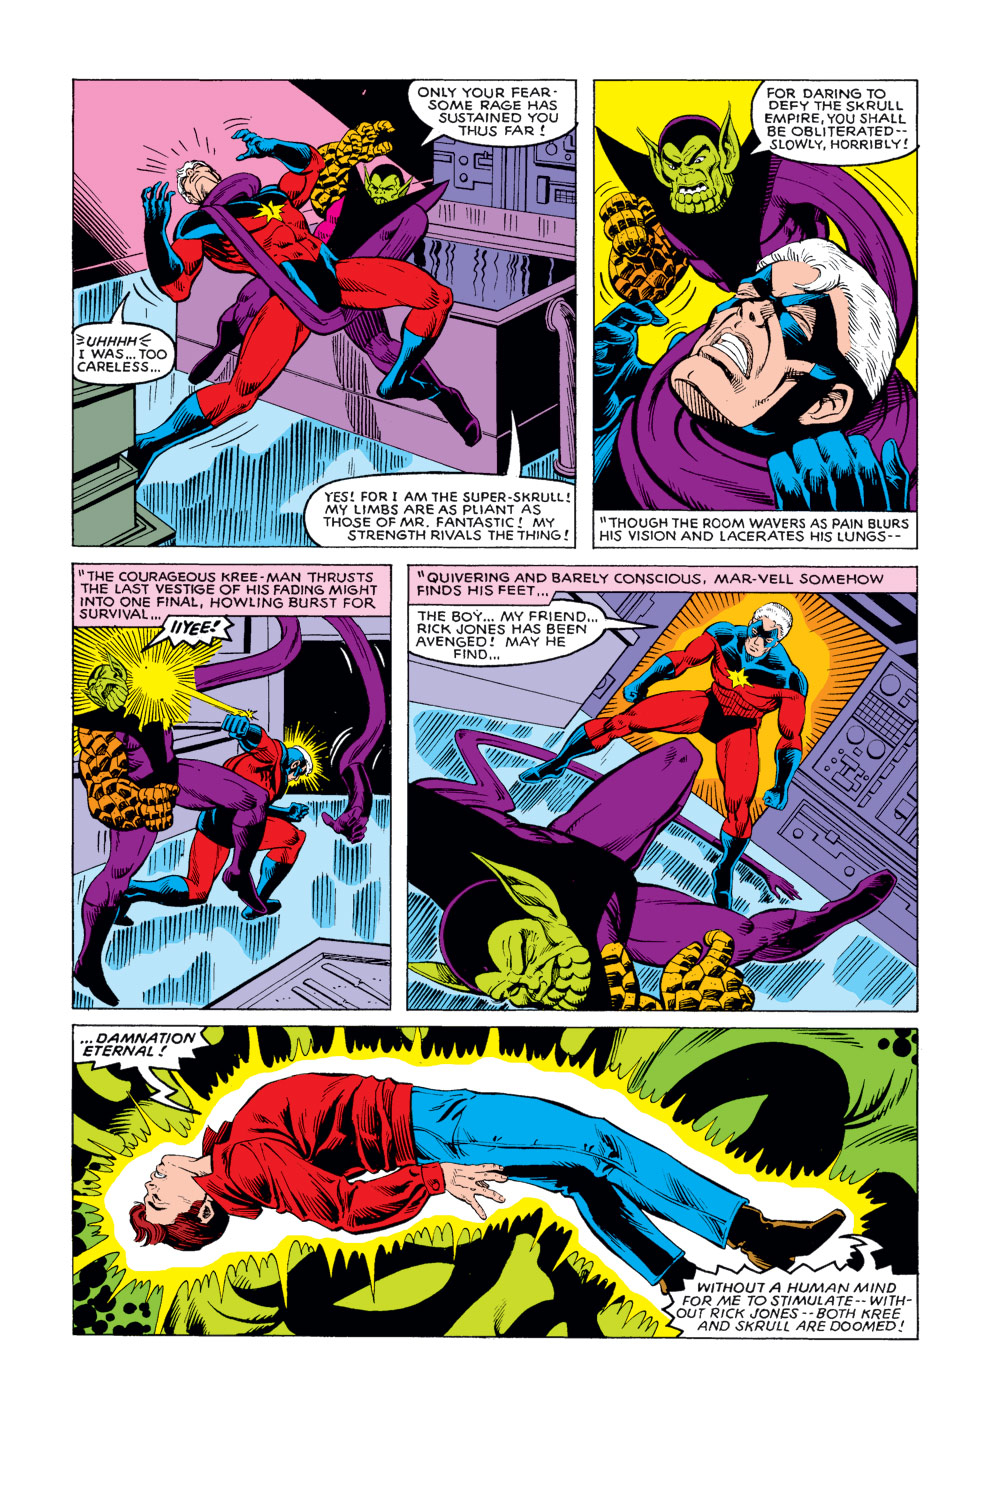 What If? (1977) issue 20 - The Avengers fought the Kree-Skrull war without Rick Jones - Page 28